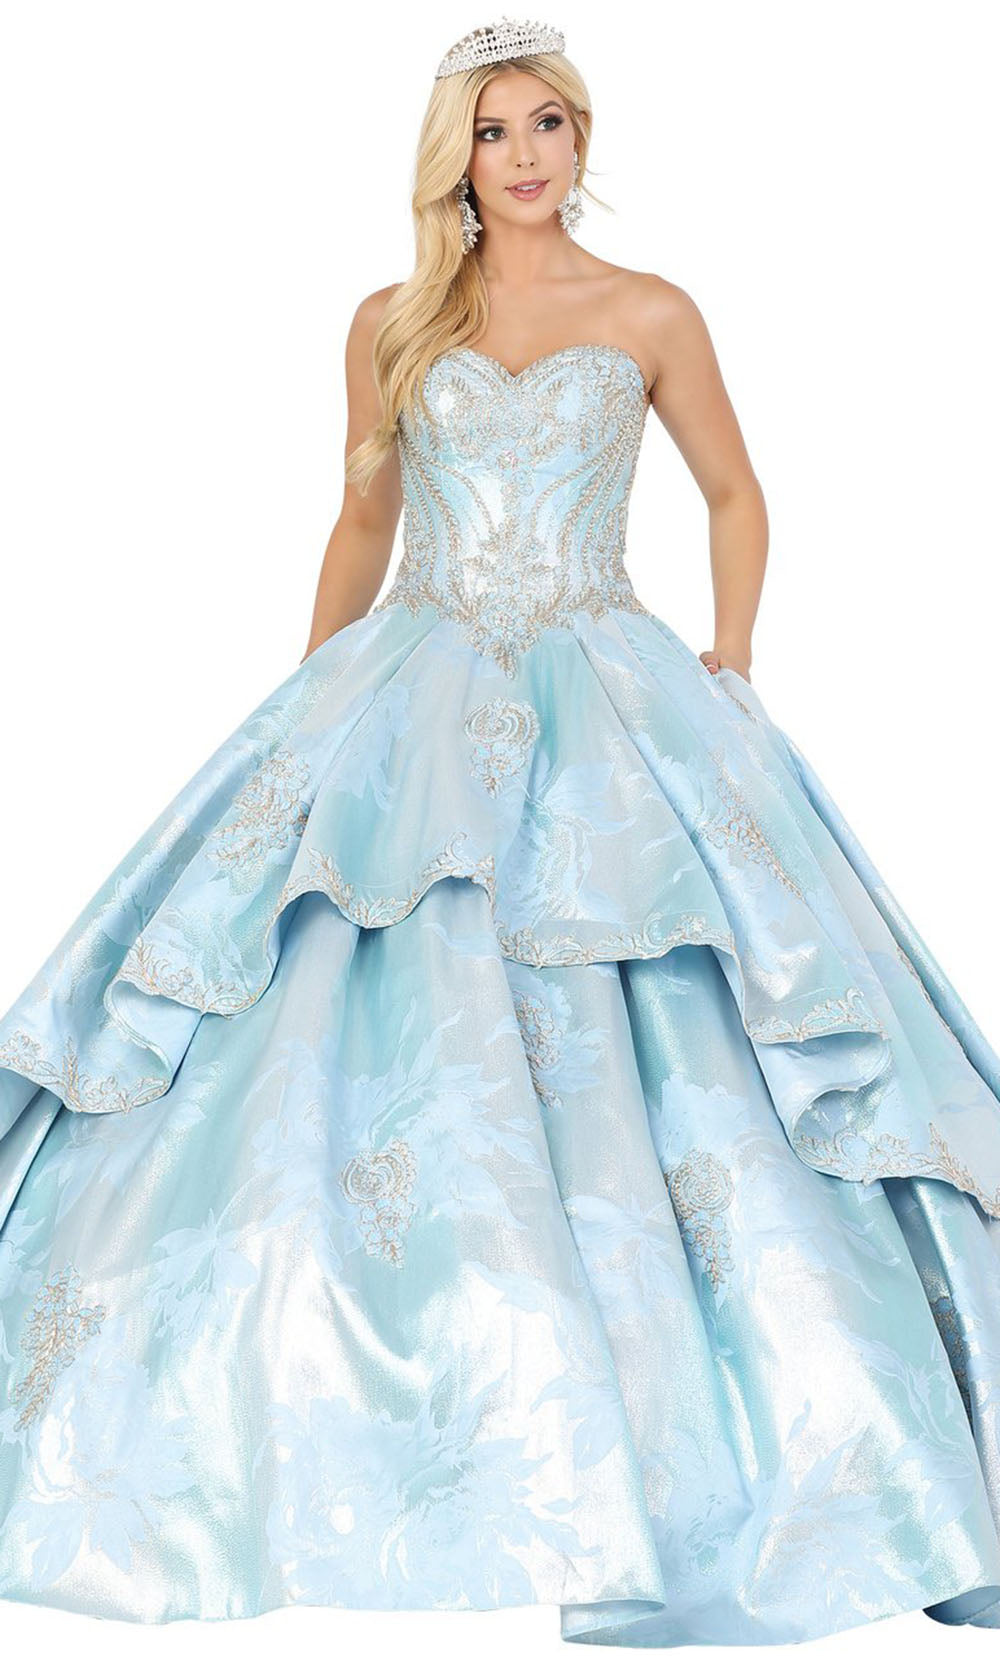 Dancing Queen - 1459 Sweetheart Embellished Floral Gown In Blue